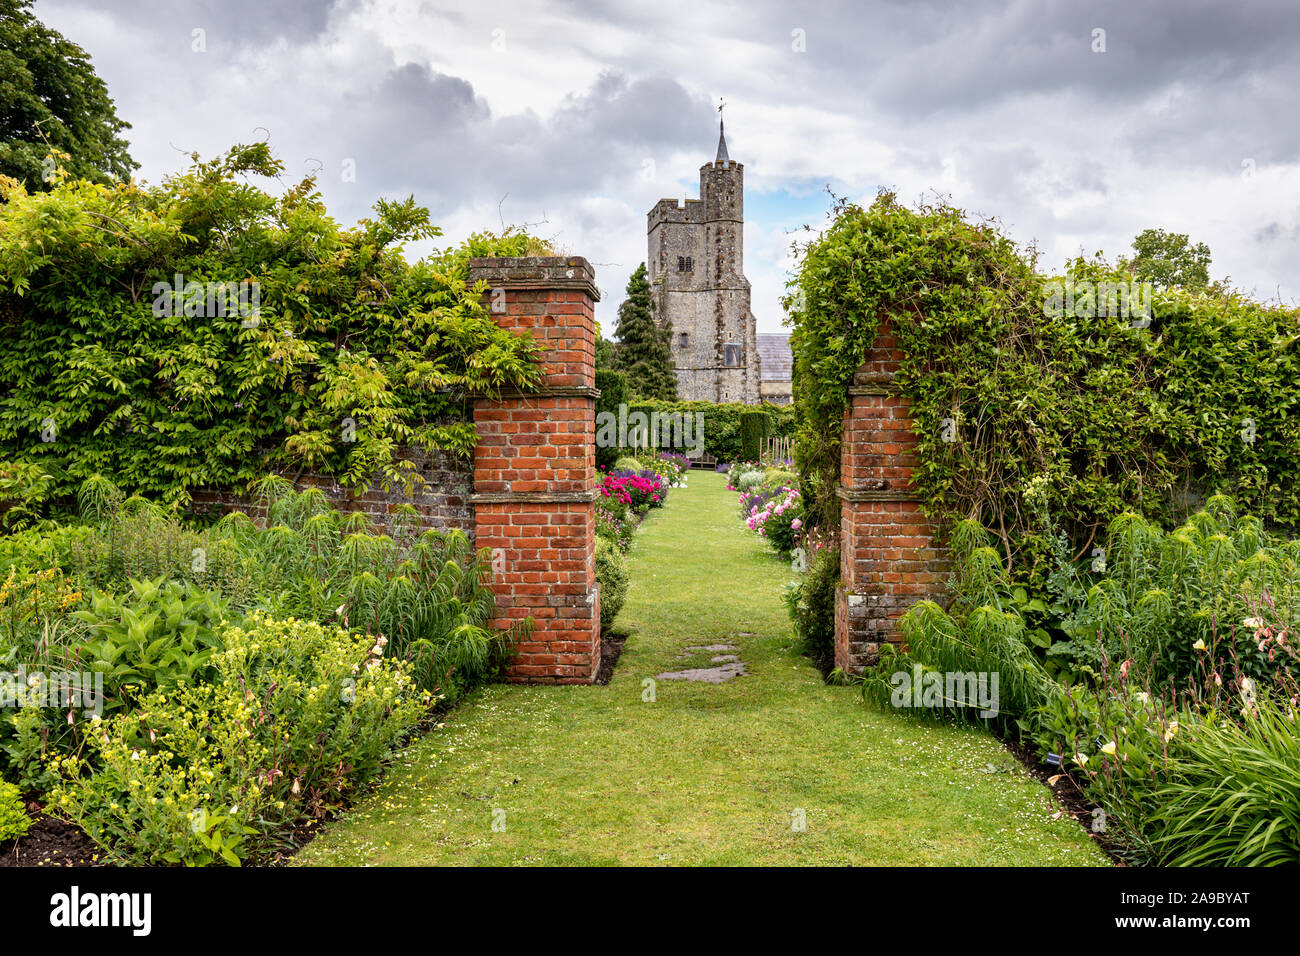 The Church of St Cross viewed from the walled gardens at Goodnestone Park, Goodnestone, Dover, Kent, UK Stock Photo